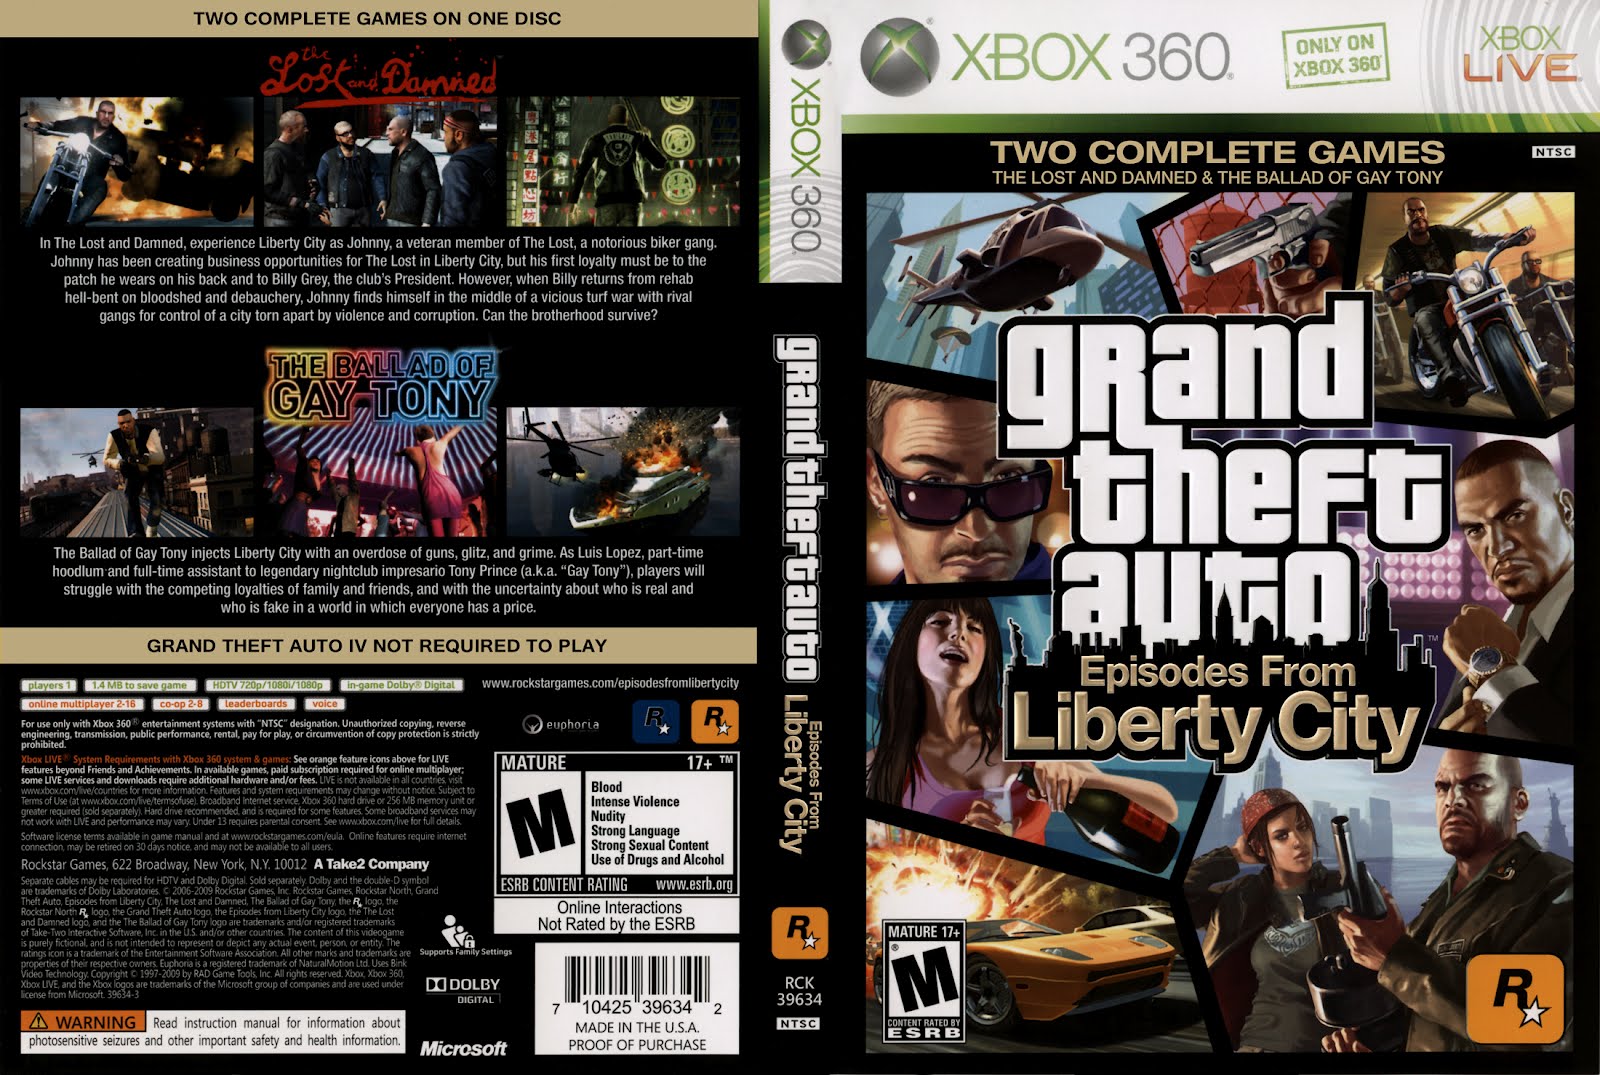 gta episodes from liberty city xbox